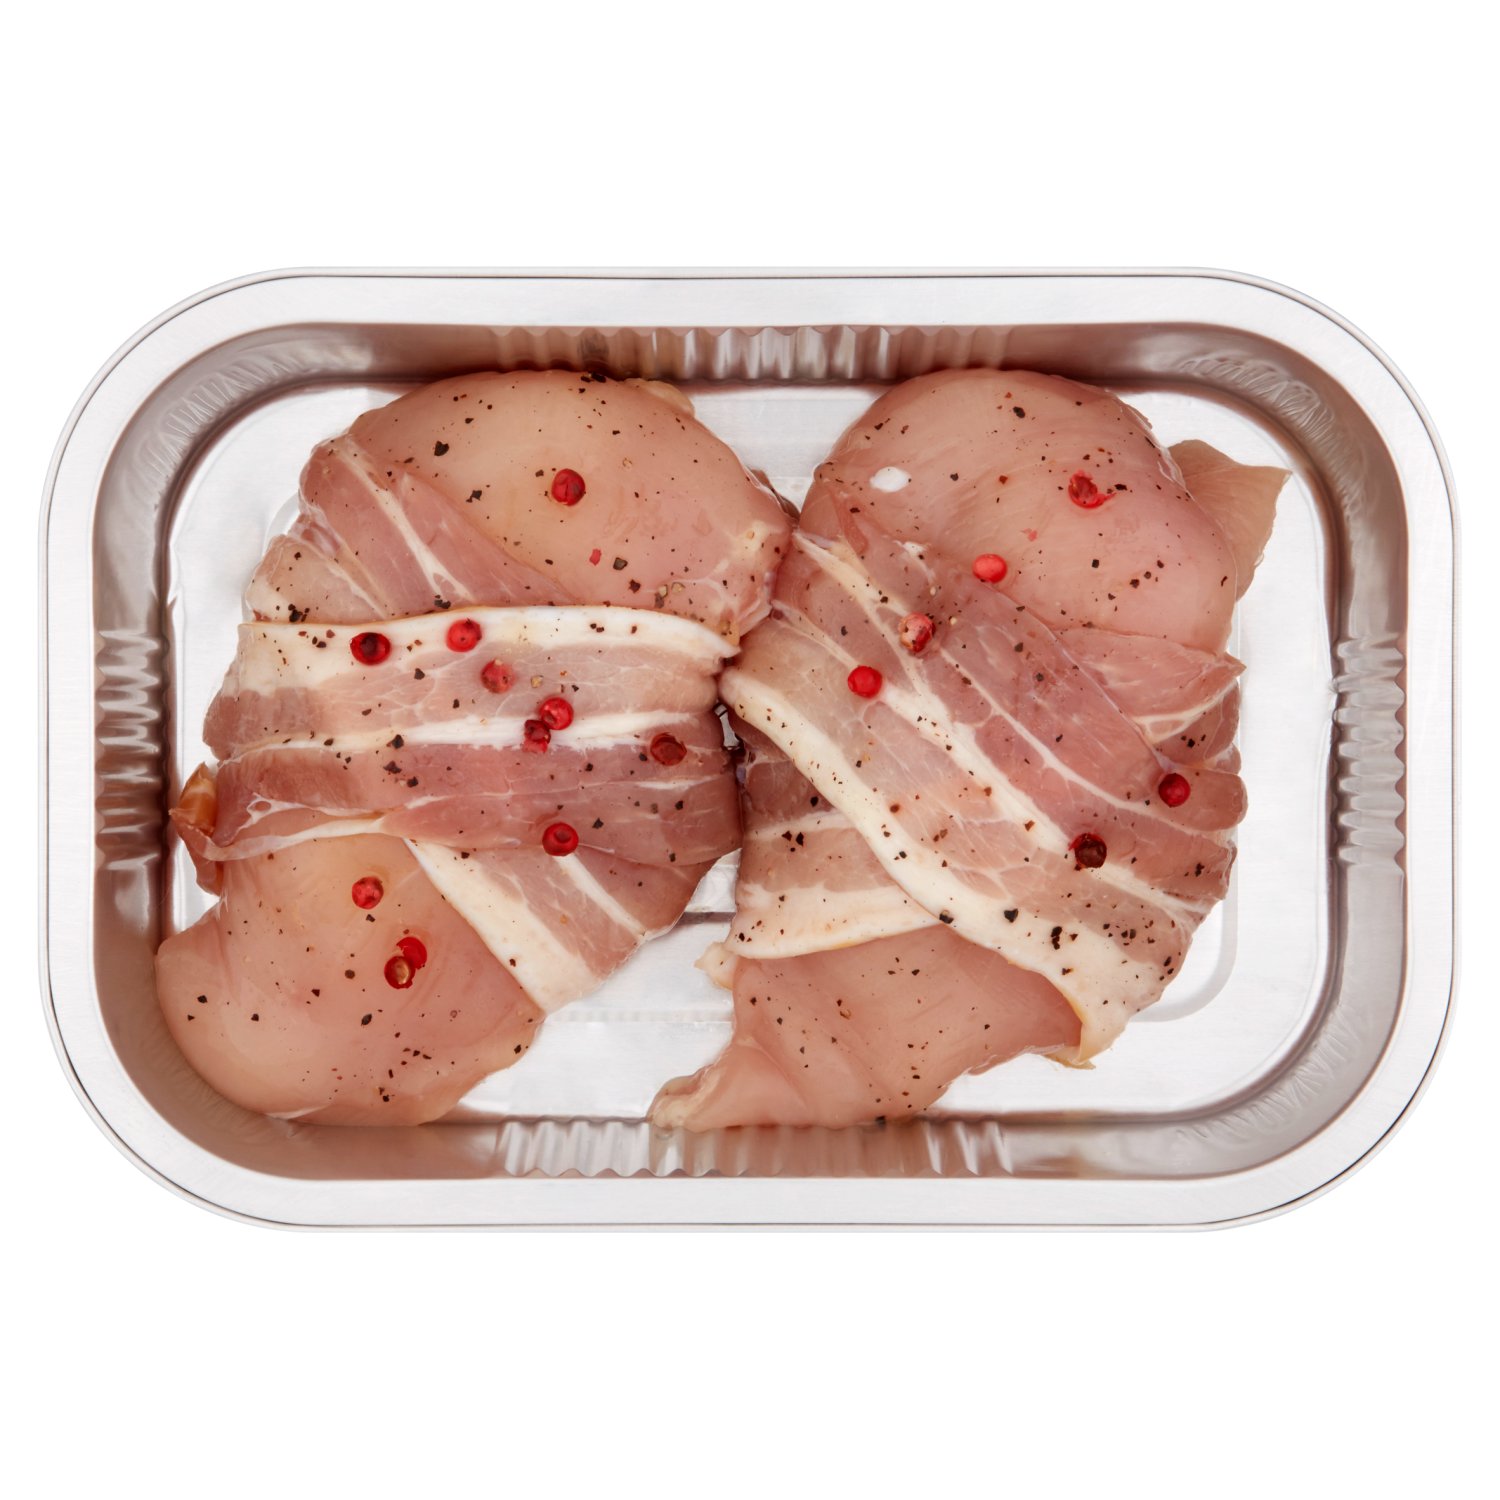 Prepared By Our Butcher Irish Chicken Pascals Wrapped in Bacon (1 Piece)